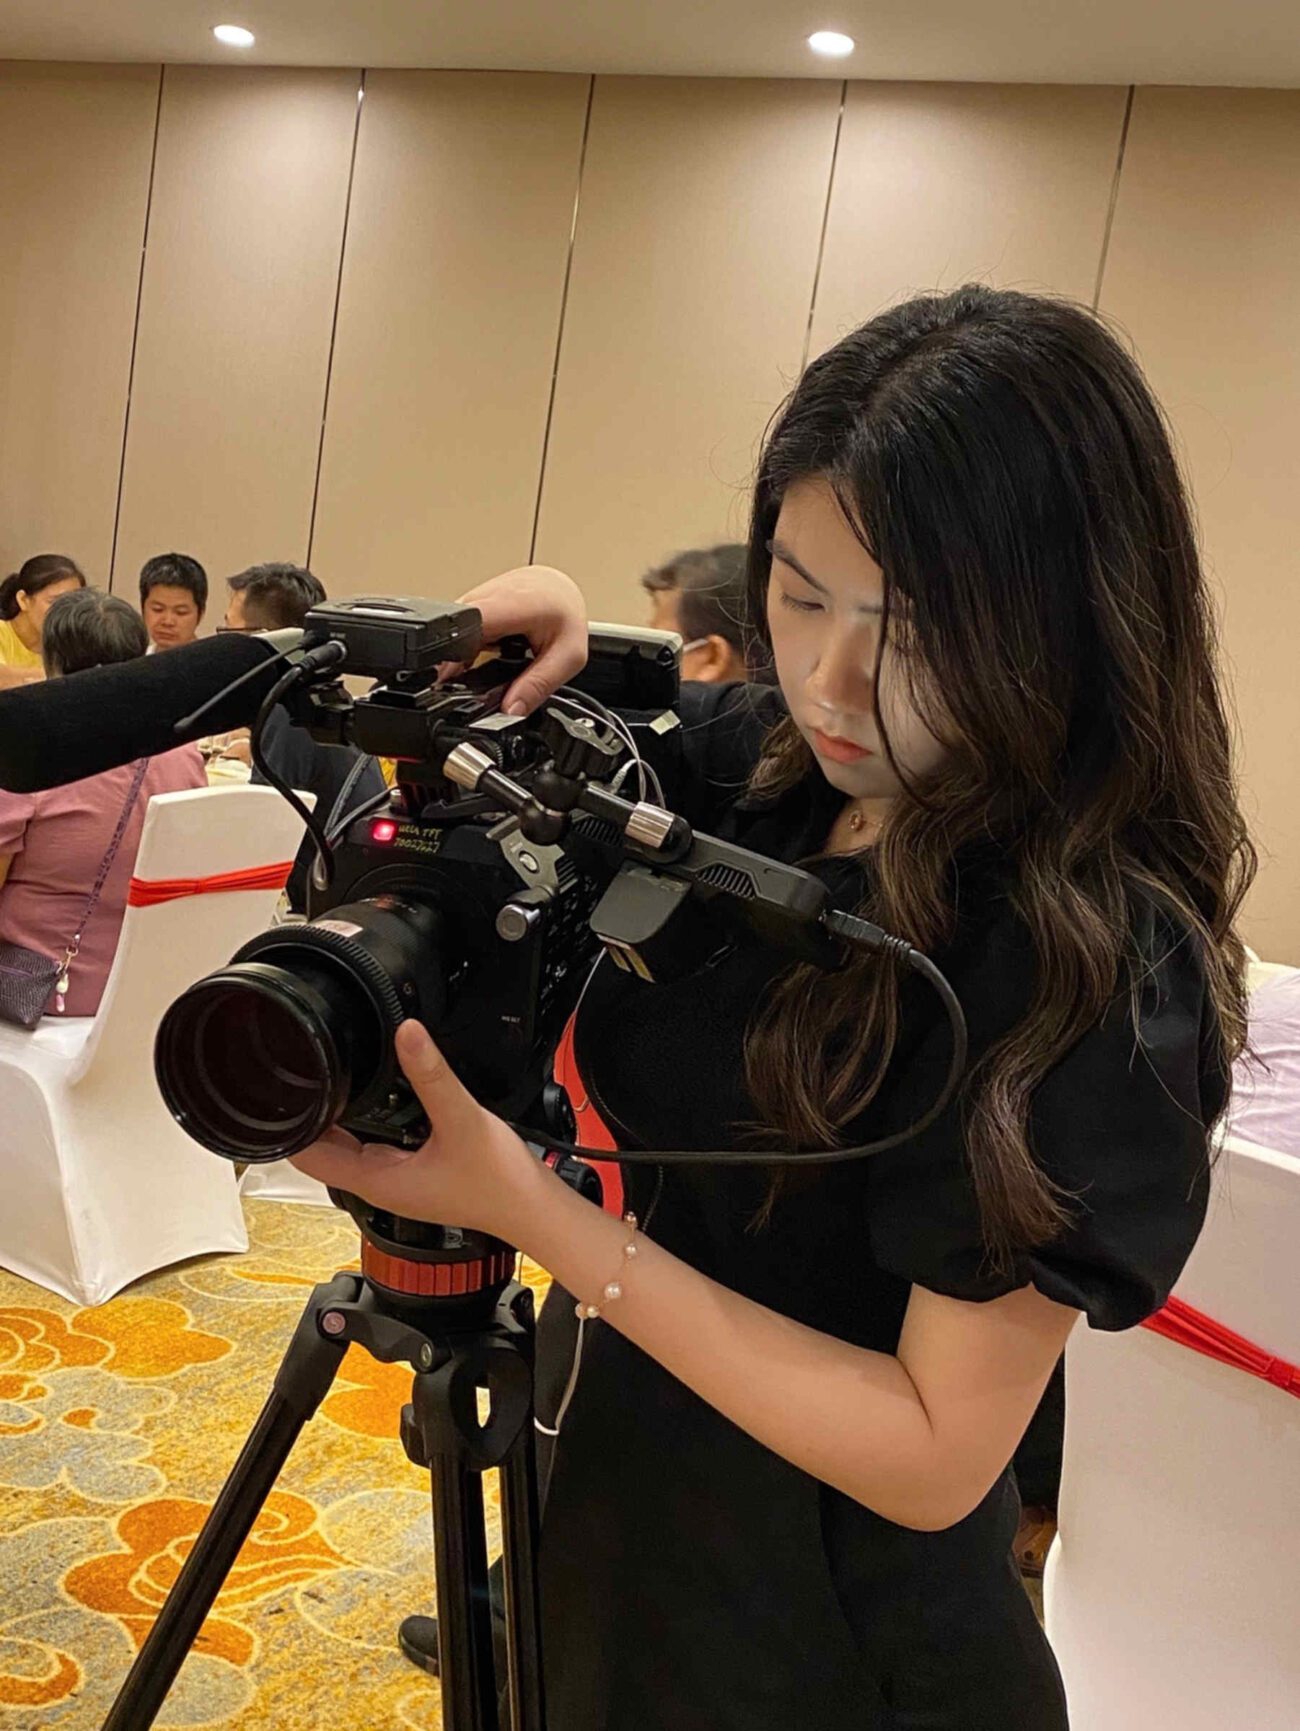 Director and editor Zheyu Liang is a pioneer for positive change. Here's what she has to say about why representation is so important in media!